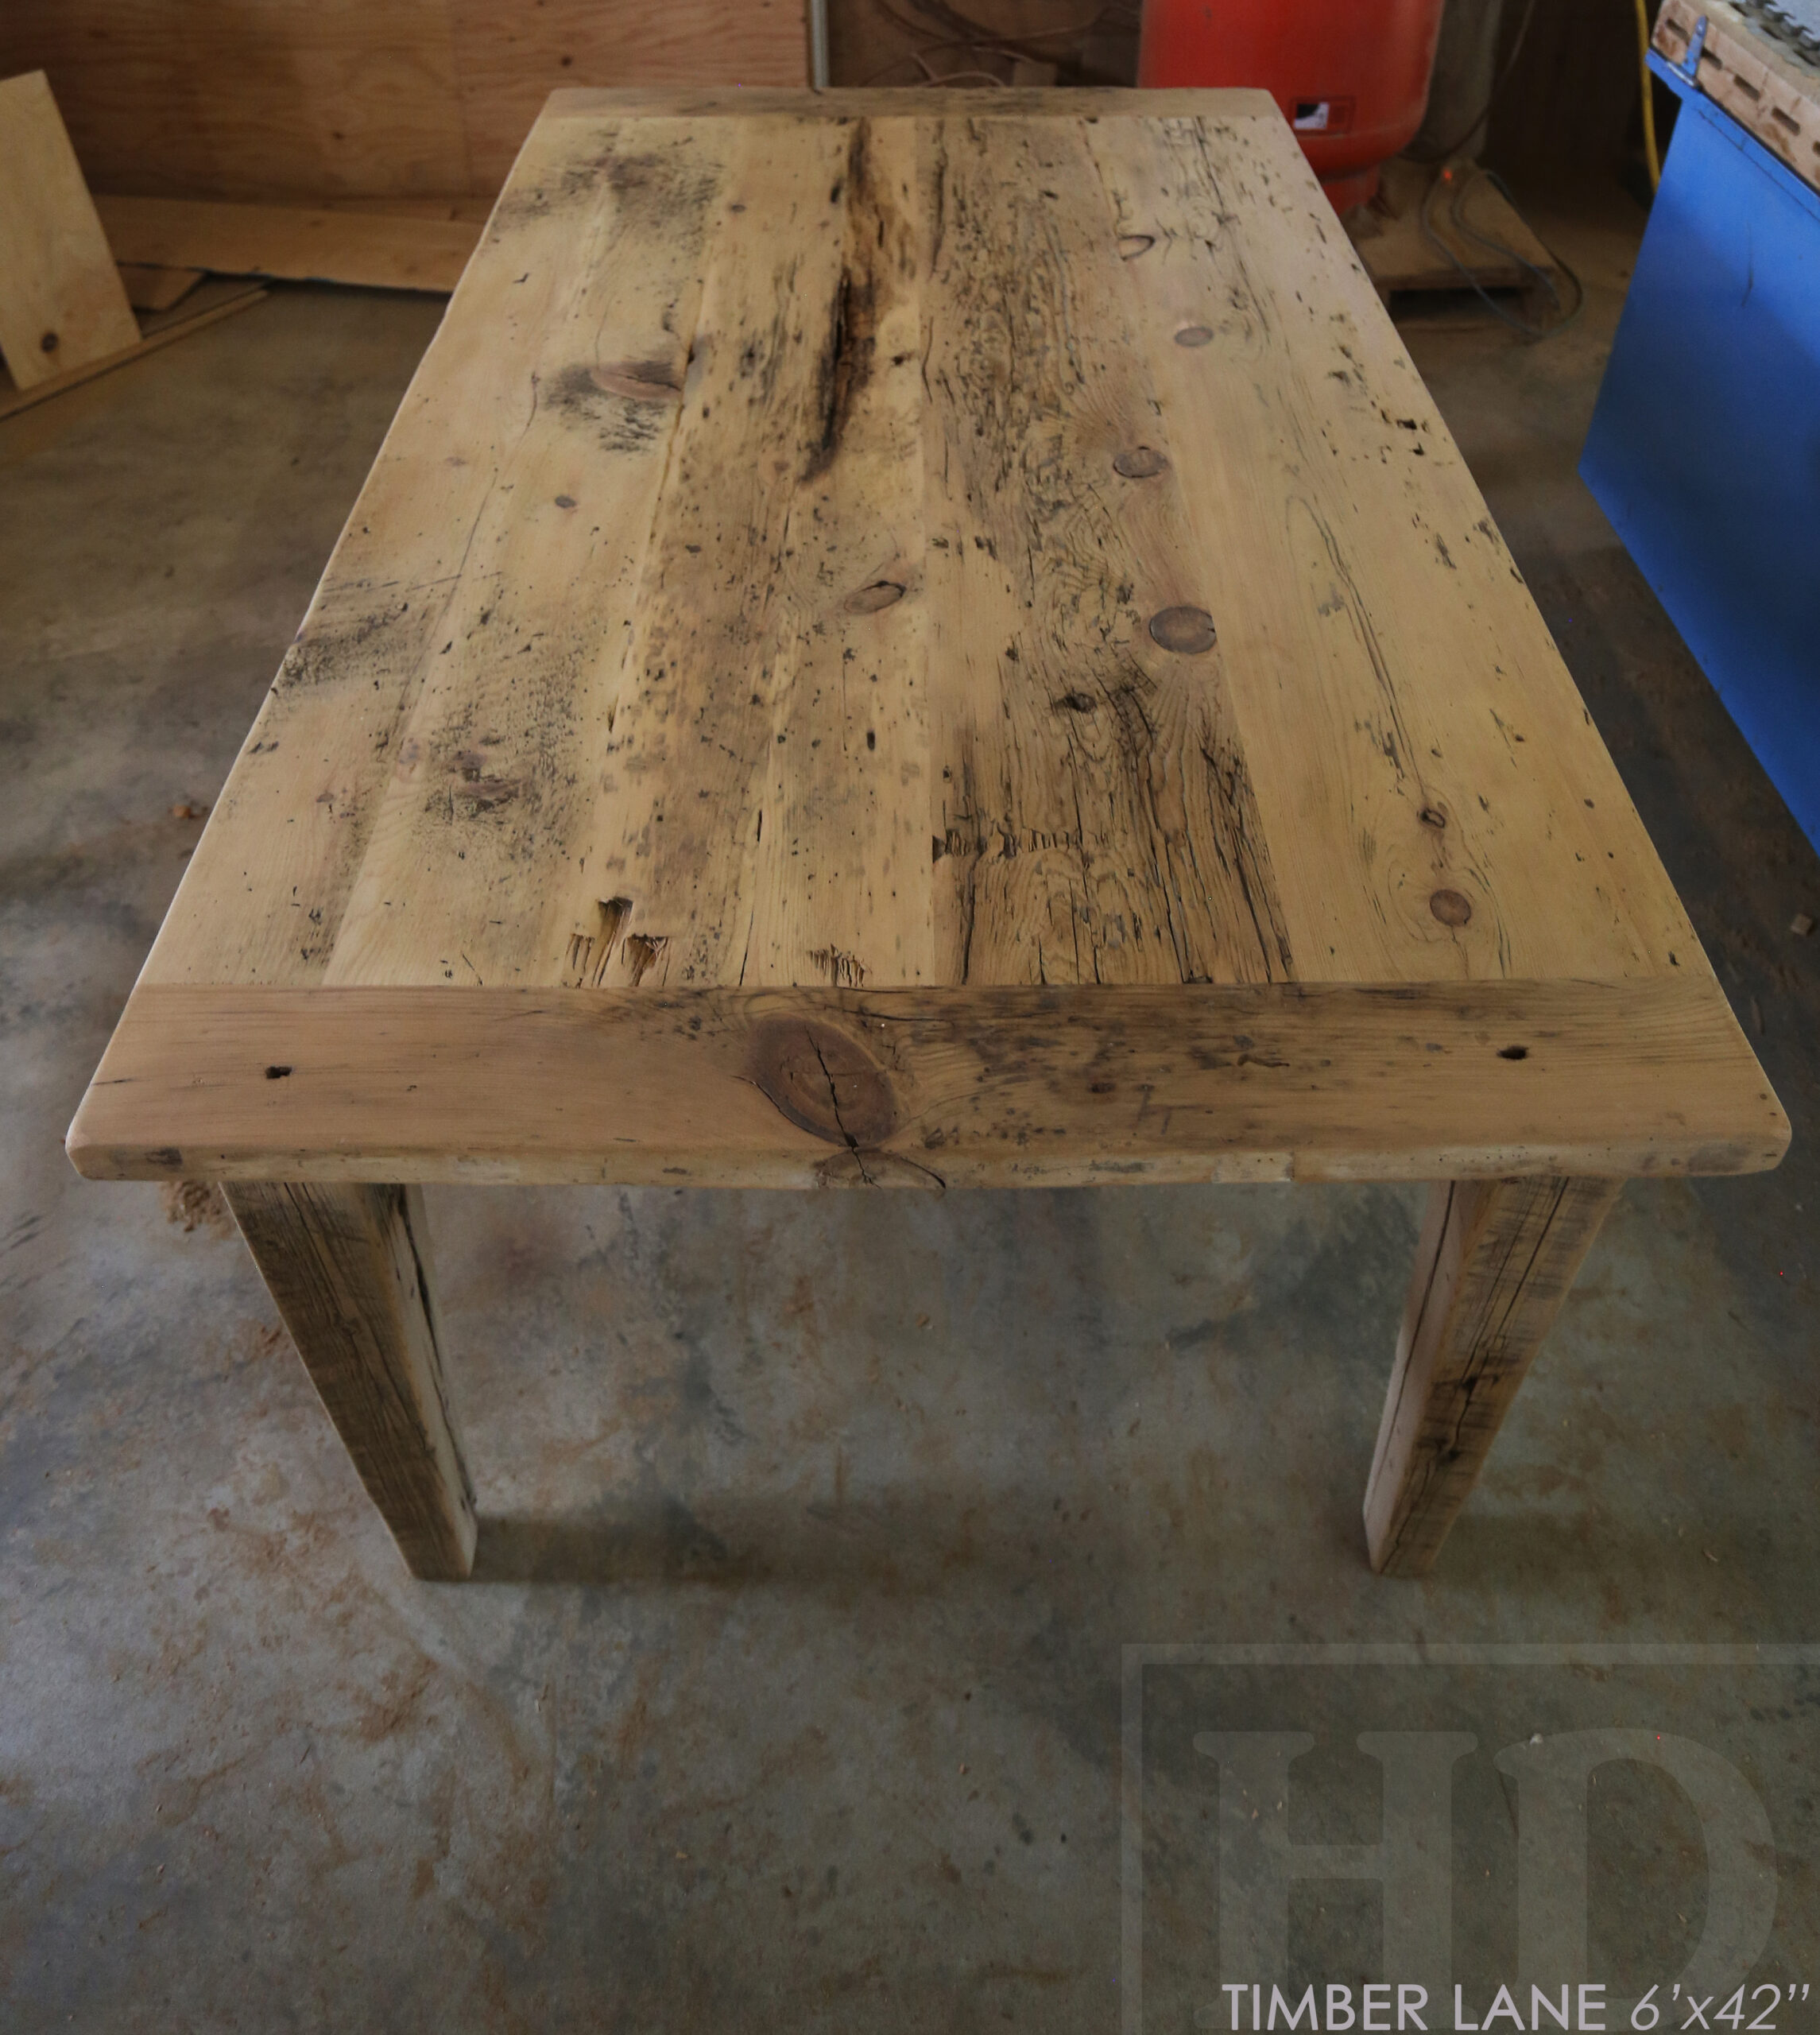 6’ Reclaimed Ontario Barnwood Table we made for an Thornbury, Ontario home – 42” wide – Harvest Base / Tapered Windbrace Beam Legs - [2] Drawers 24” wide on long sides - Old Growth Hemlock Threshing Floor Construction - Original edges & distressing maintained – Bread Edge Ends - Premium epoxy + matte polyurethane finish – [6] Athena Chairs / Wormy Maple / Black Painted Frame; Seat Stained Colour of Table / Polyurethane clearcoat finish - www.table.ca